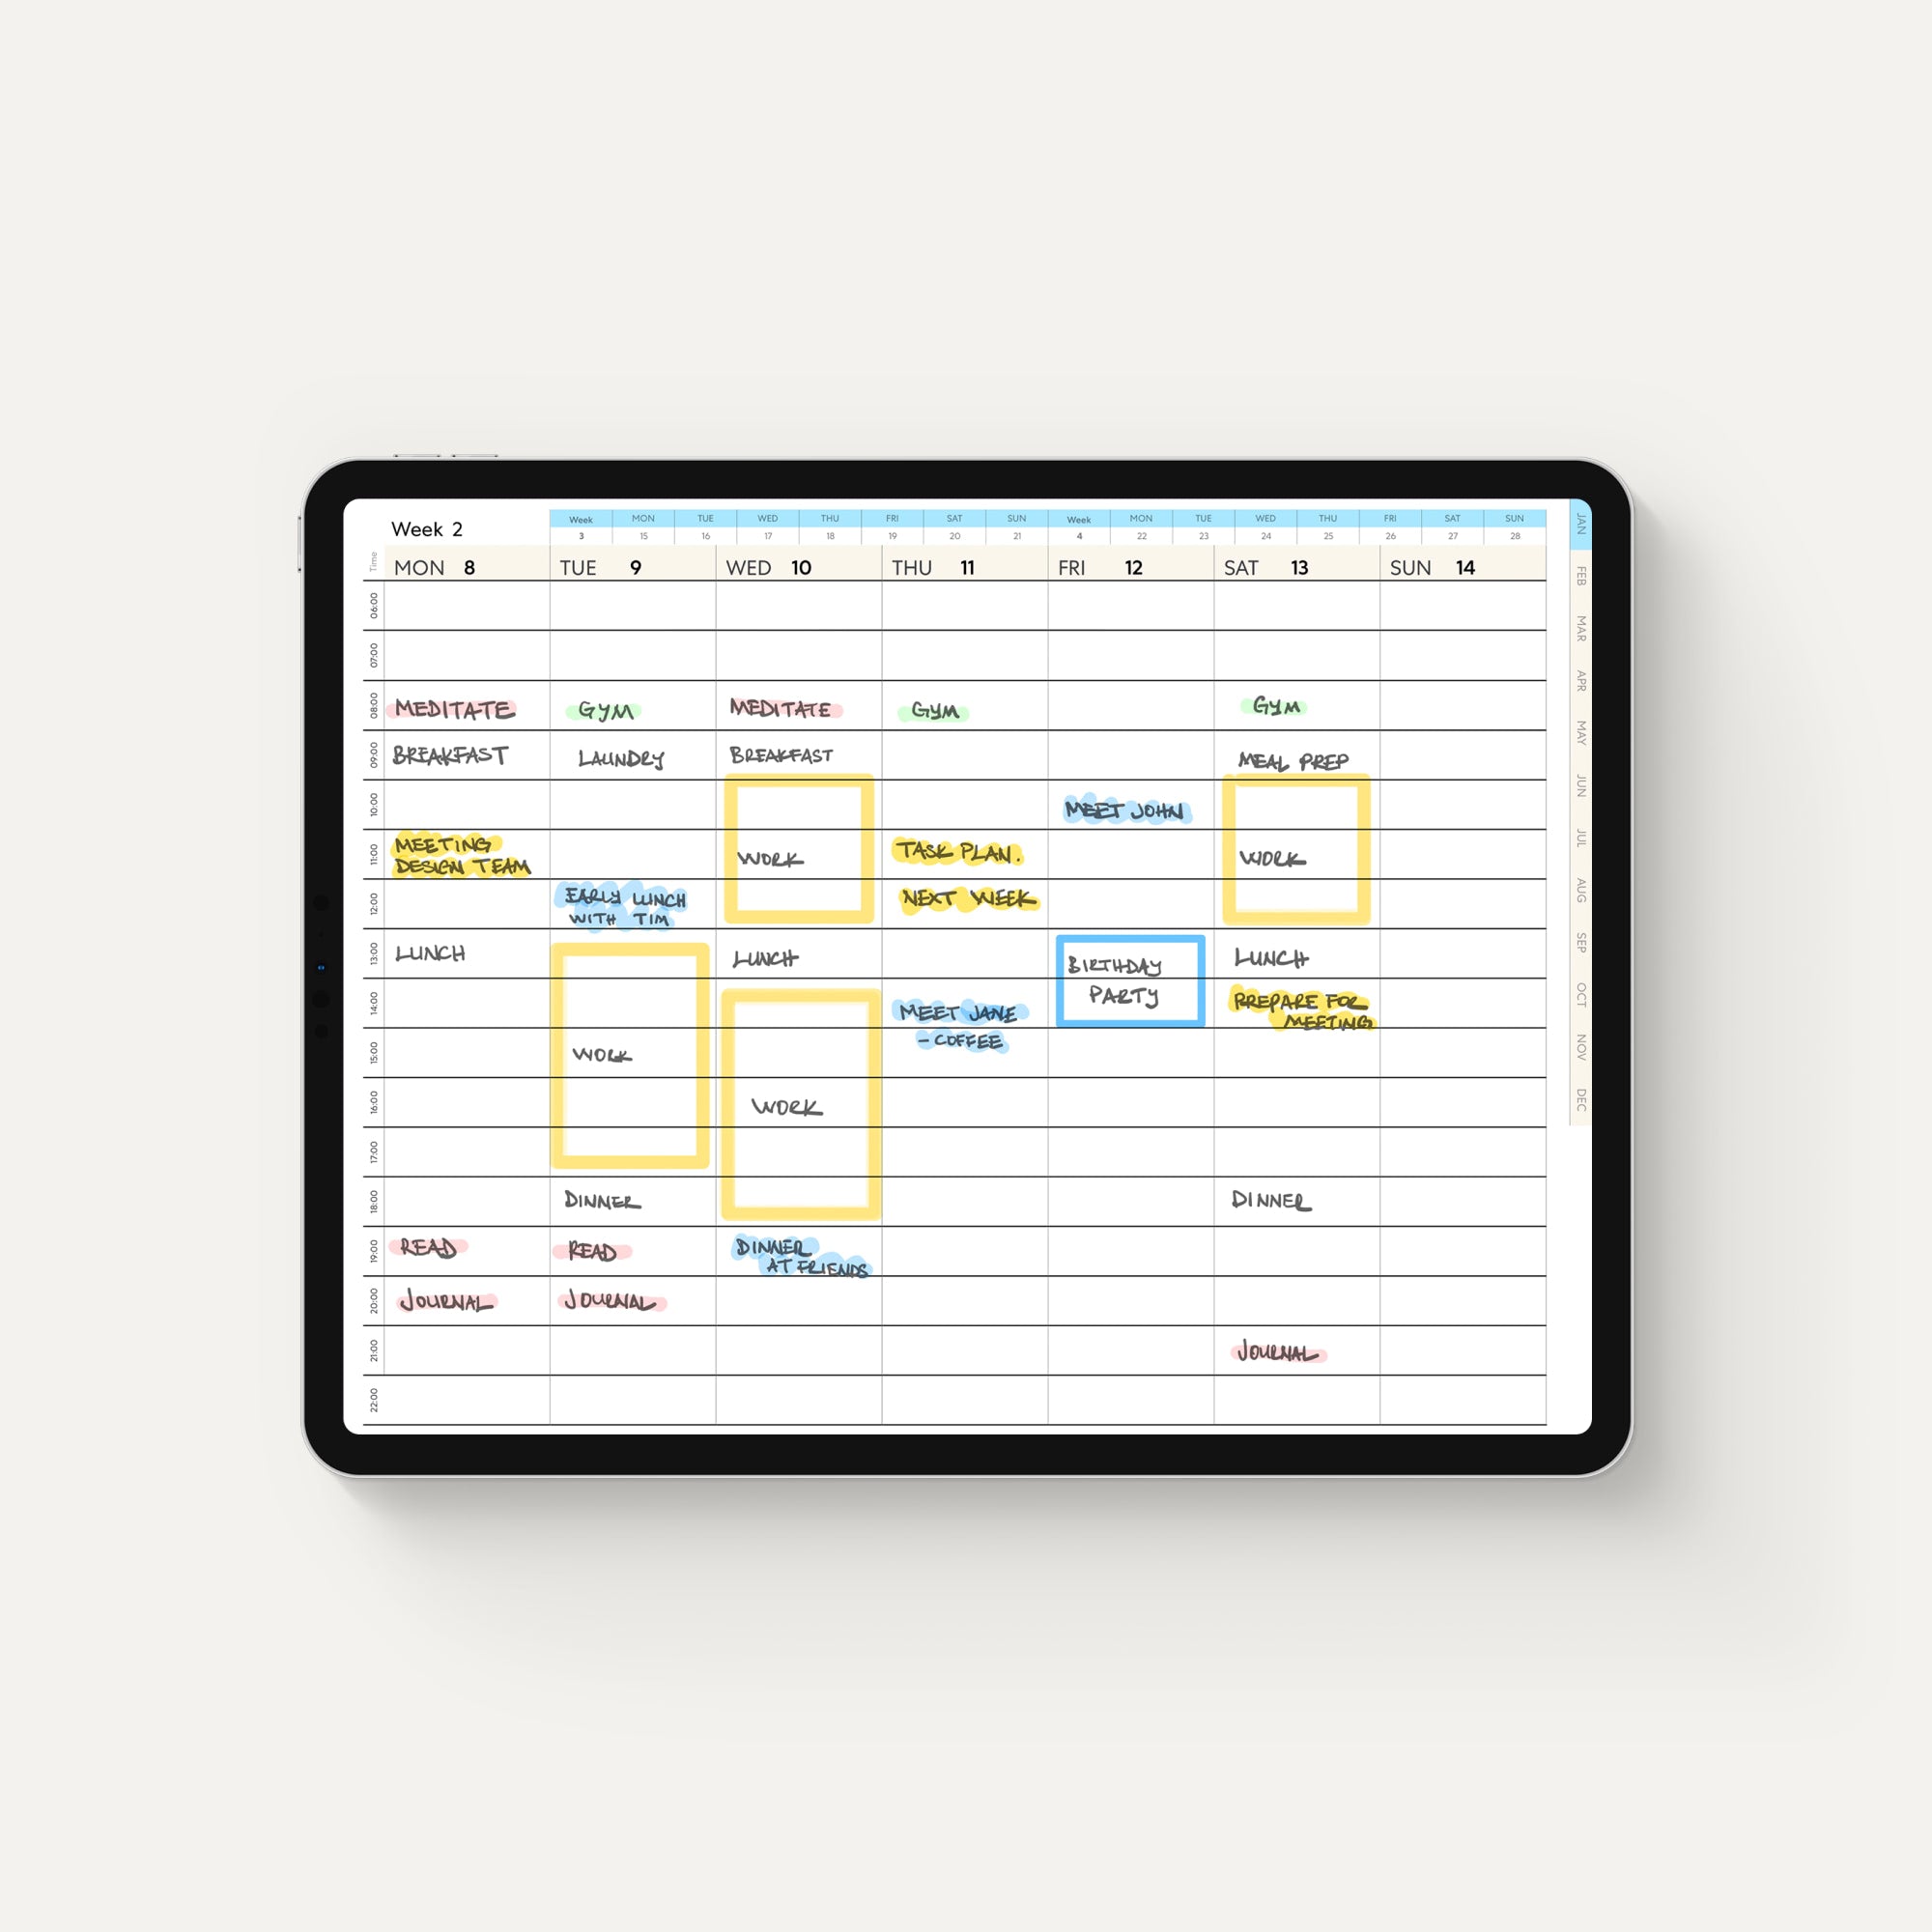 Display of digital planner as a full calendar year by month